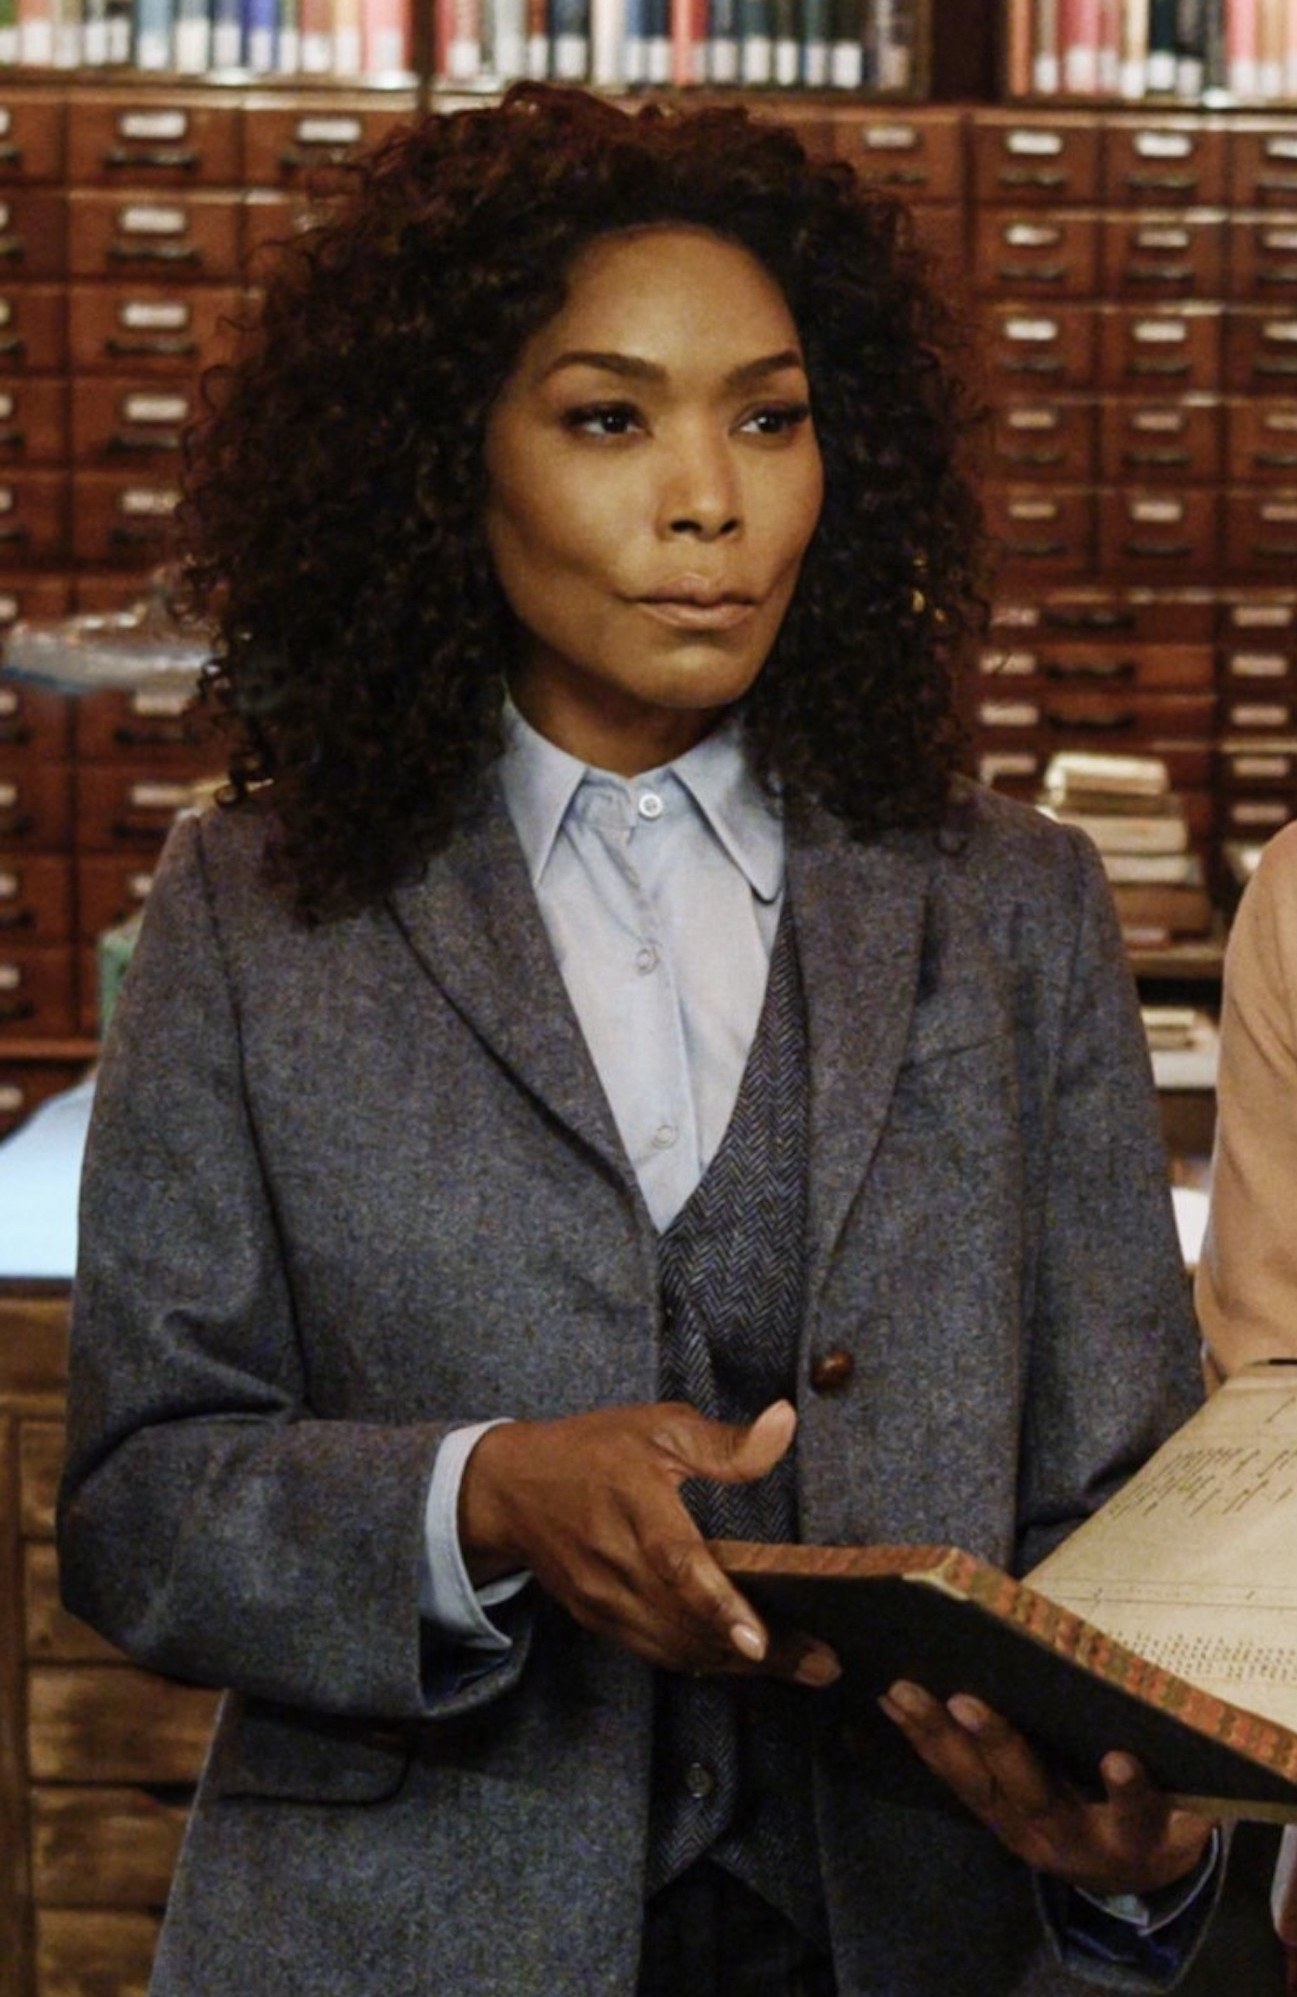 Angela Bassett wearing a three-piece suit while holding a book